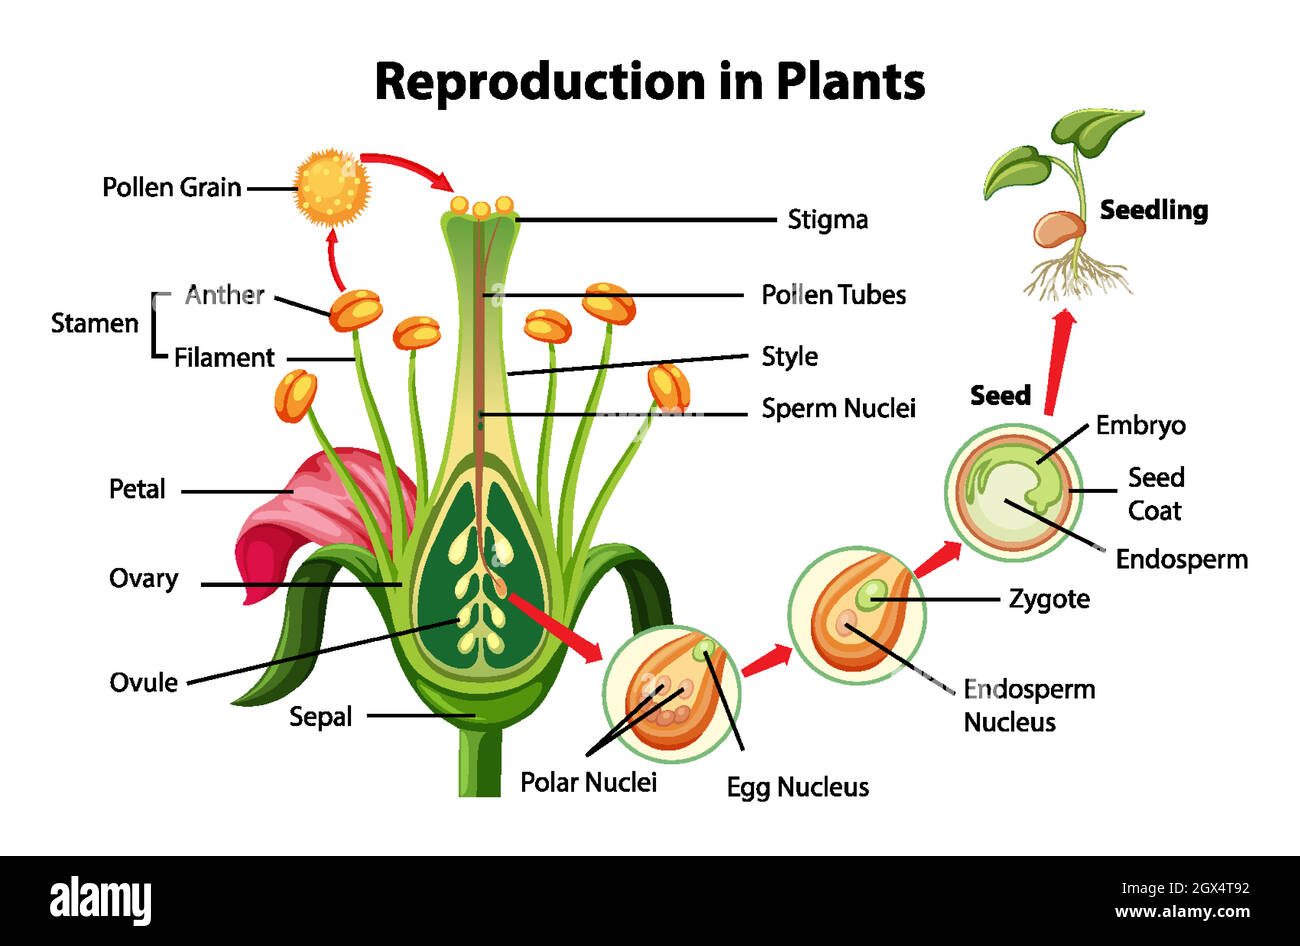 Reproduction in plants diagram Stock Vector